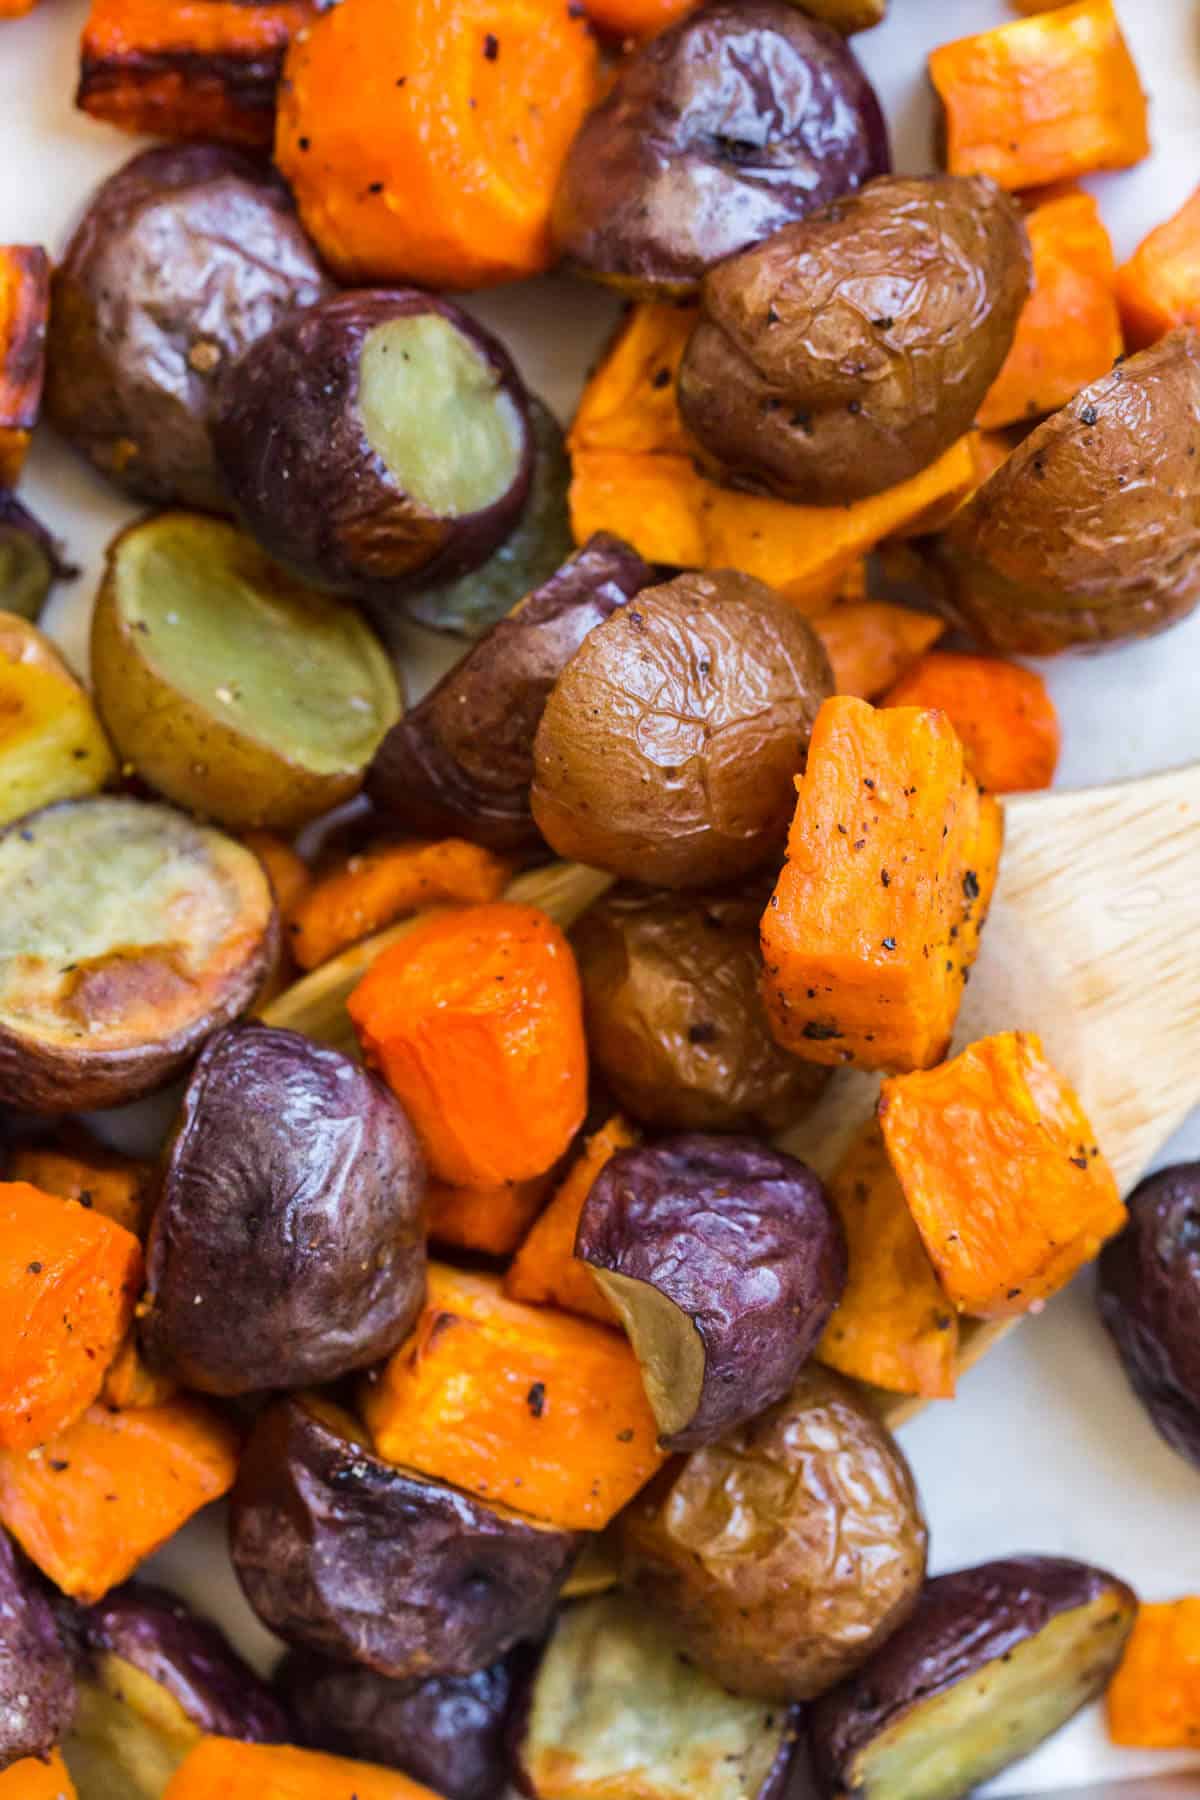 Roasted root vegetables on a sheet pan with a wooden serving spoon.